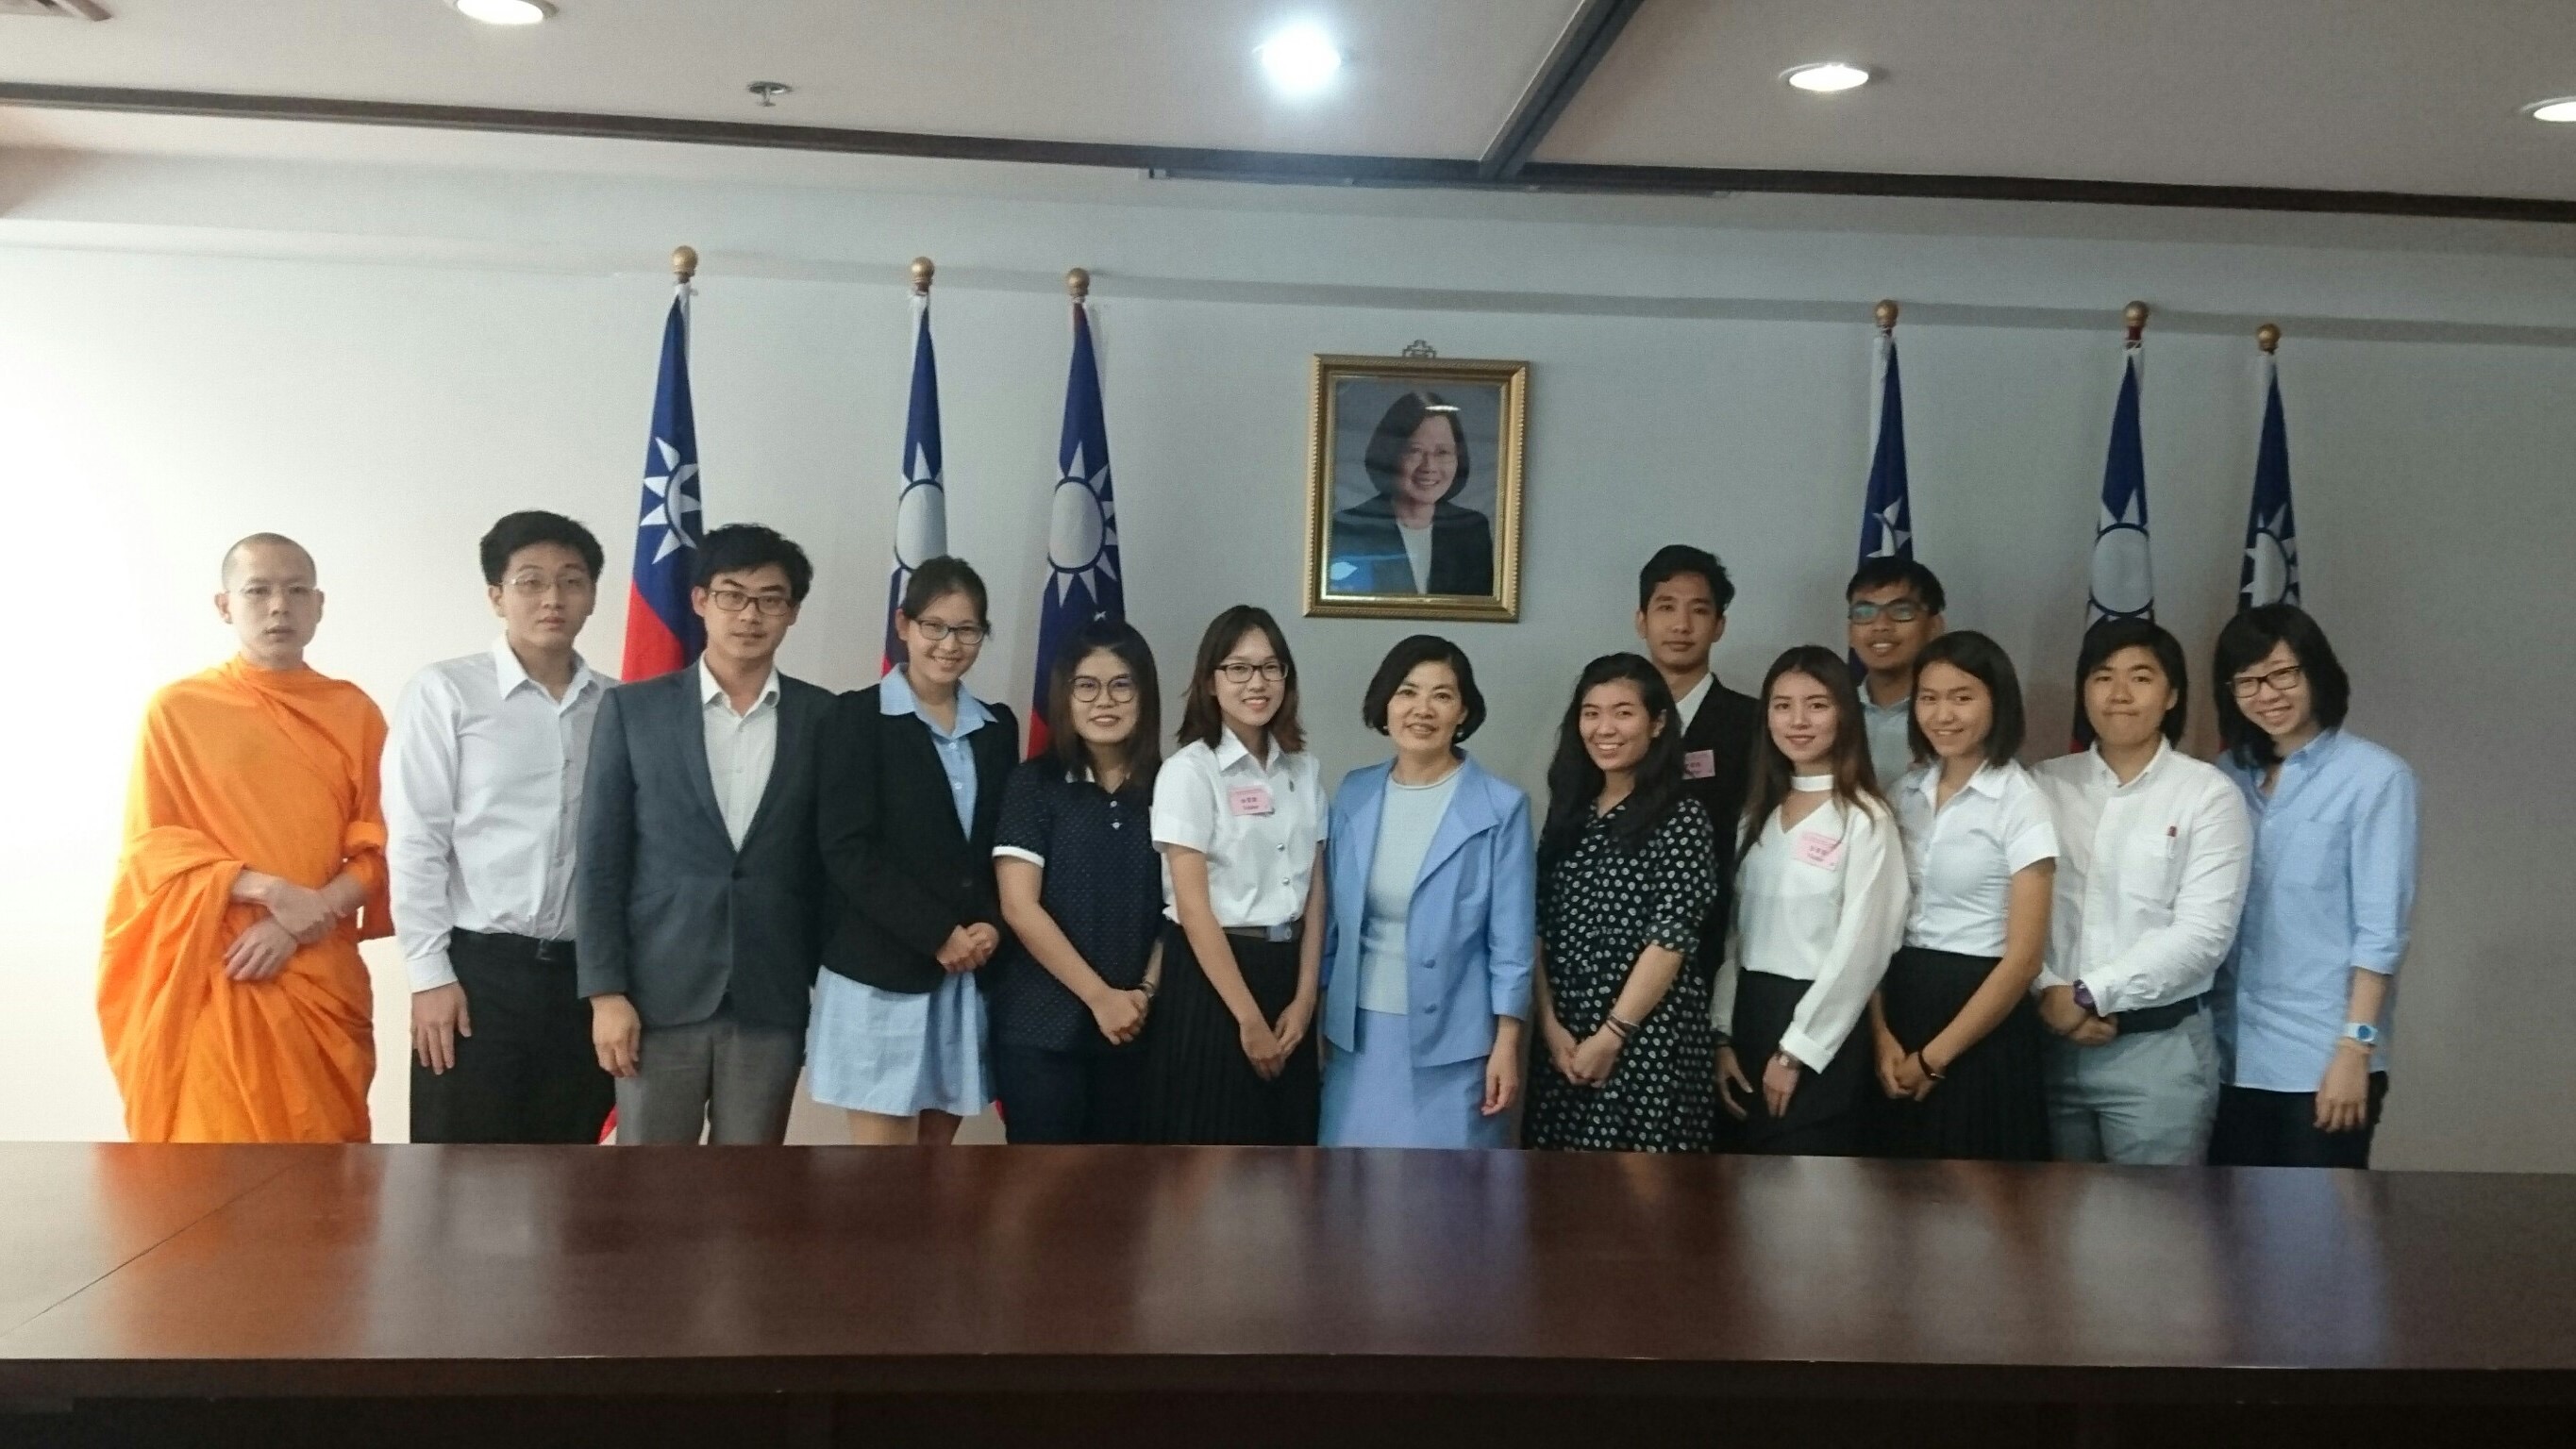 Thai Recipients of a 2016 Taiwan Scholarship Beginning their Study Journey to Taiwan